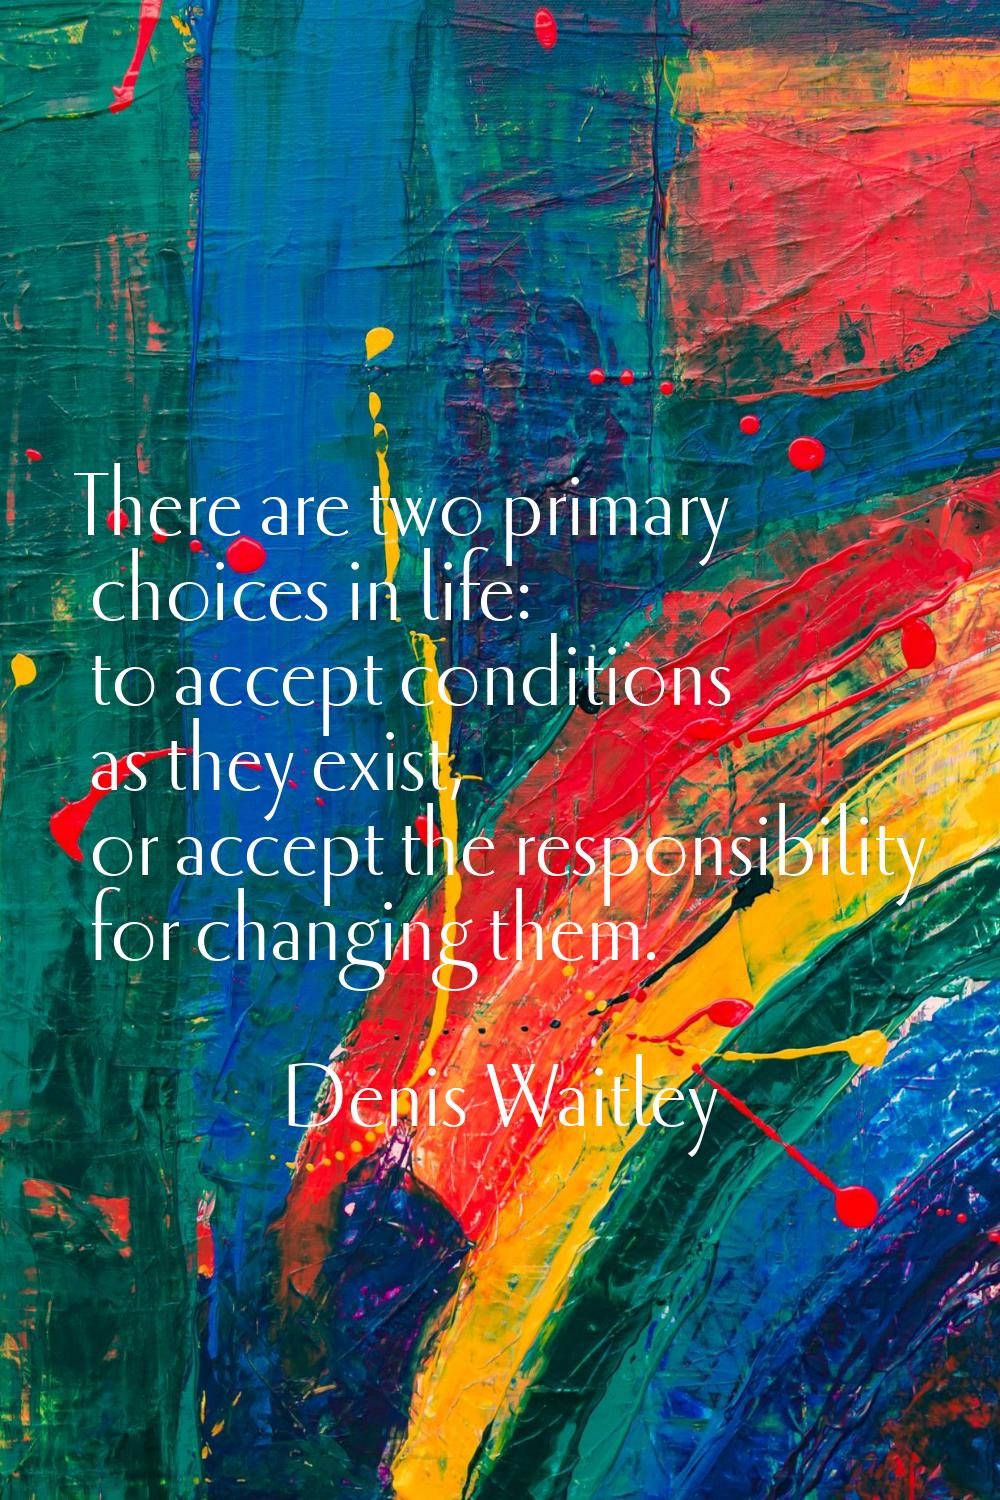 There are two primary choices in life: to accept conditions as they exist, or accept the responsibi